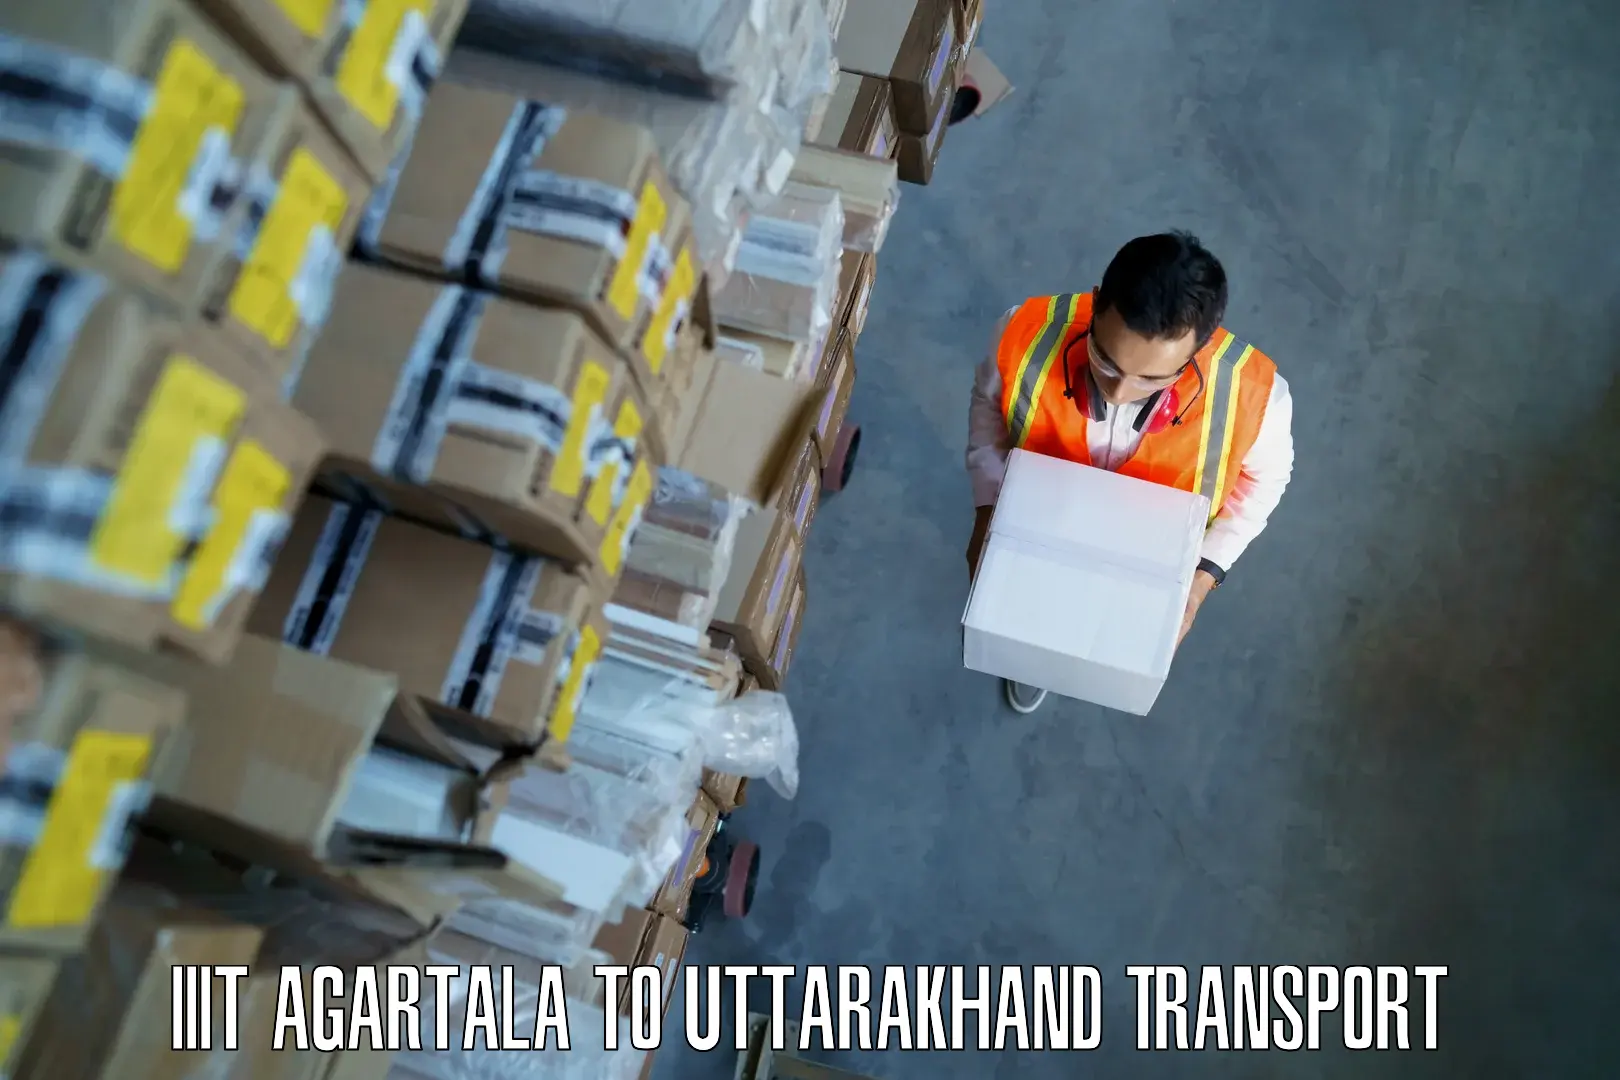 Commercial transport service IIIT Agartala to Rudrapur